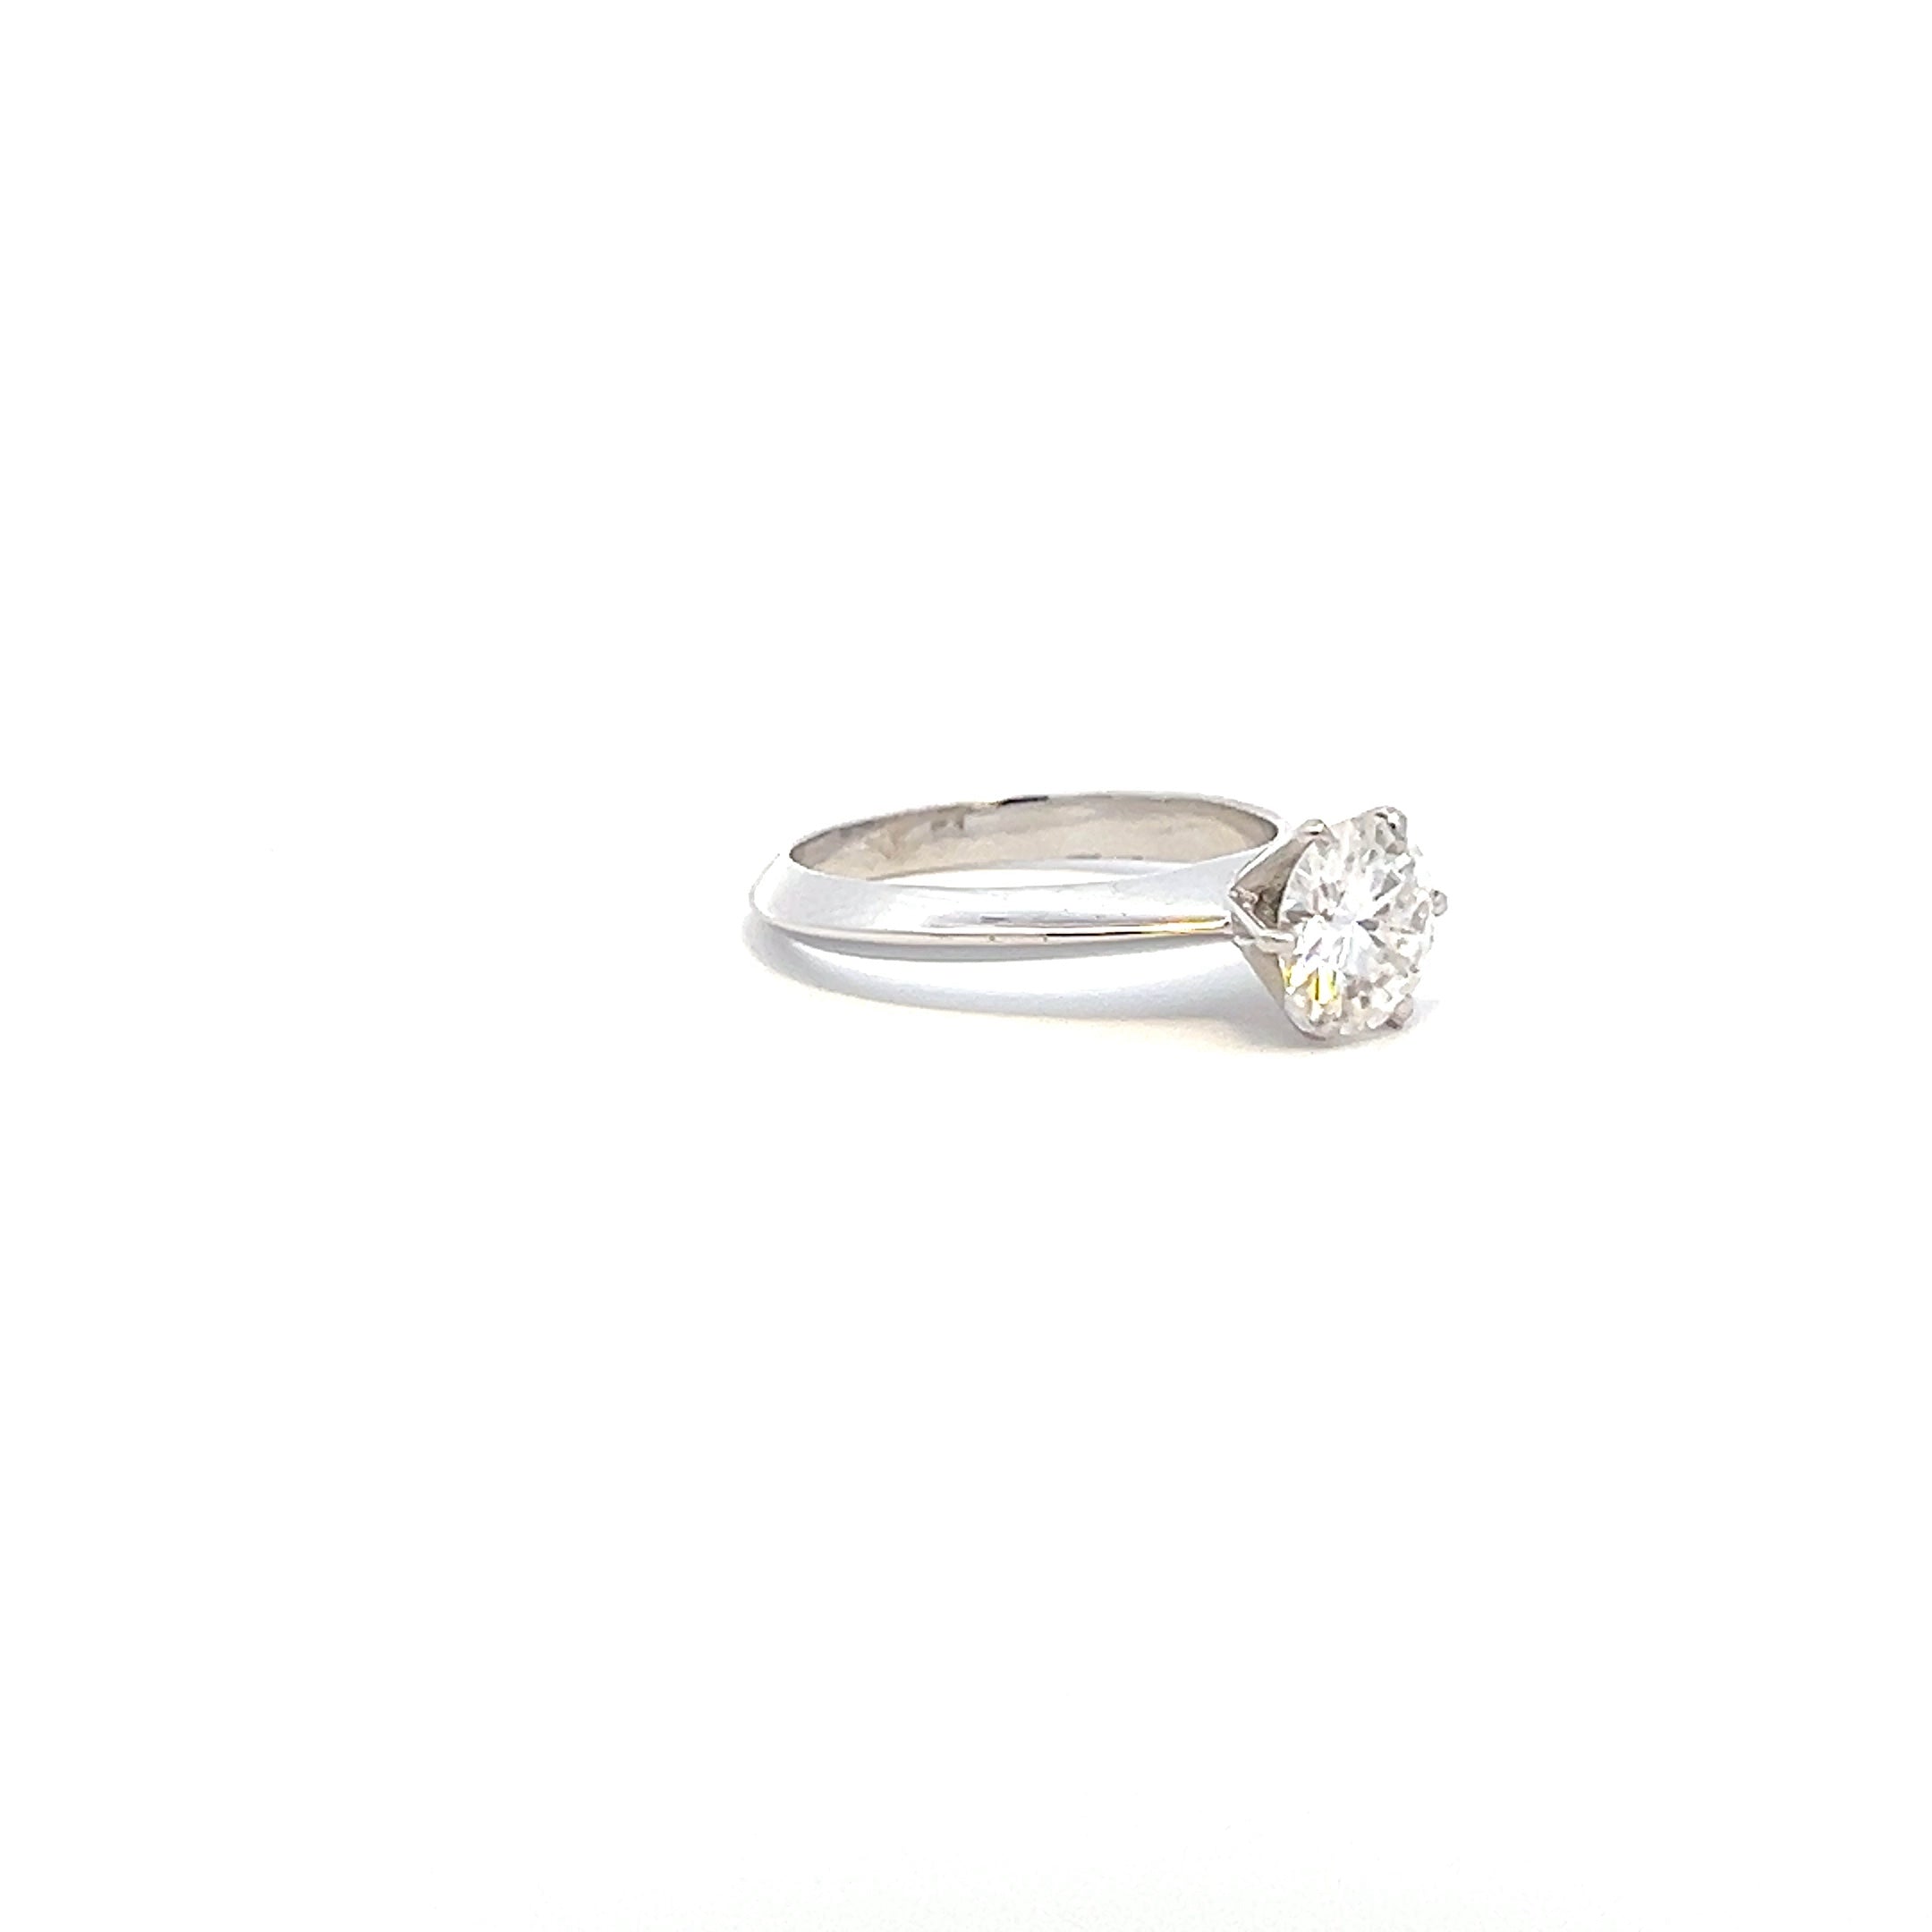 Dainty Dazzle is 1.00ct Round Shape Ring in 14K Gold with Lab Grown Moissanite